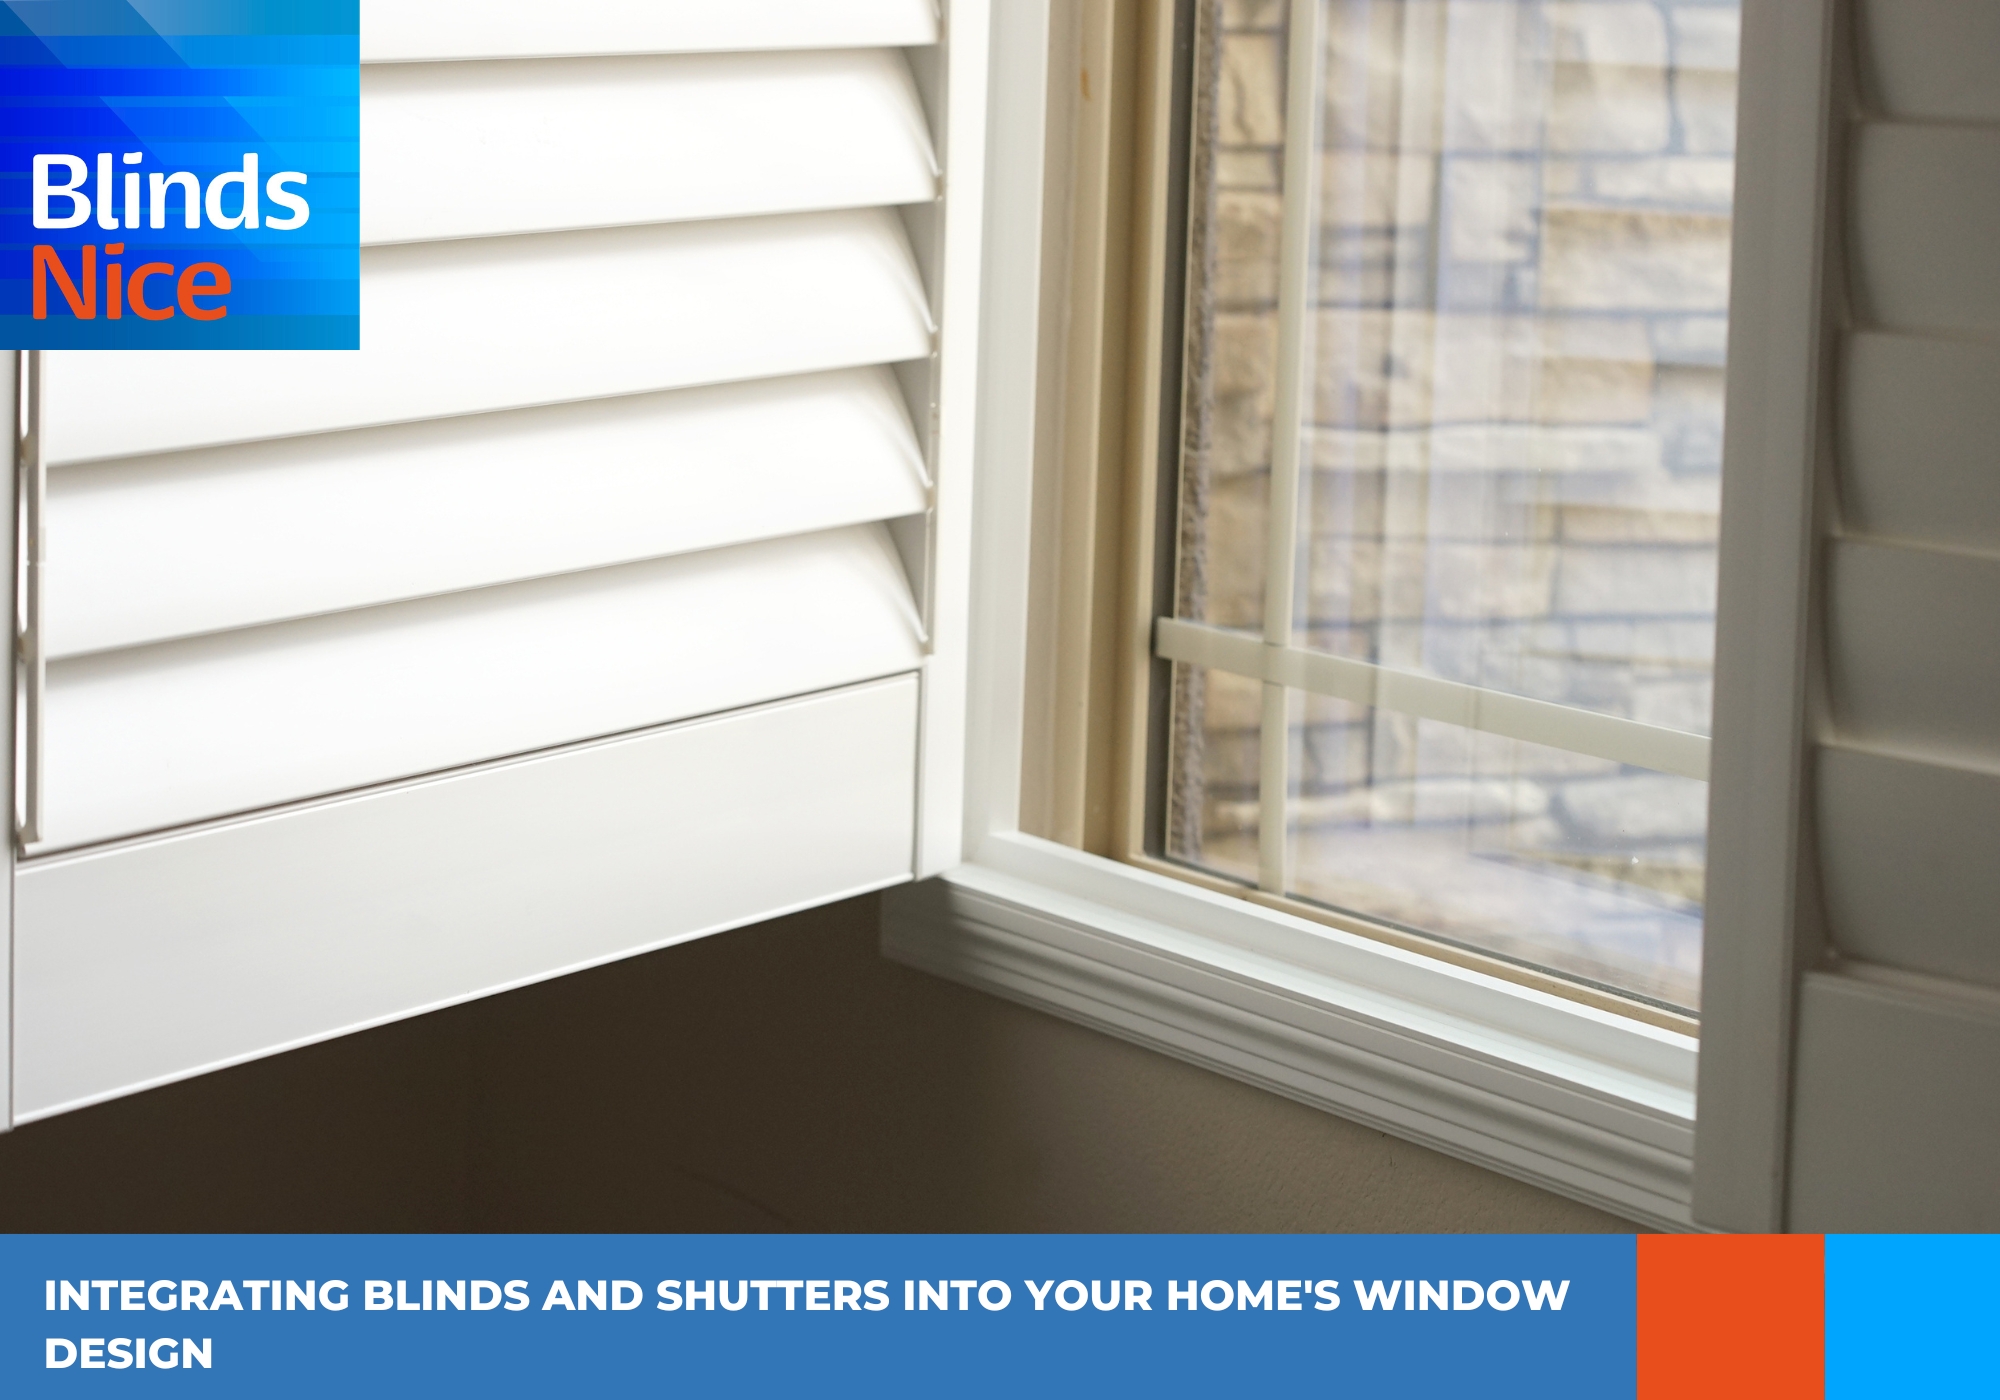 Integrating blinds and shutters into your home's window design